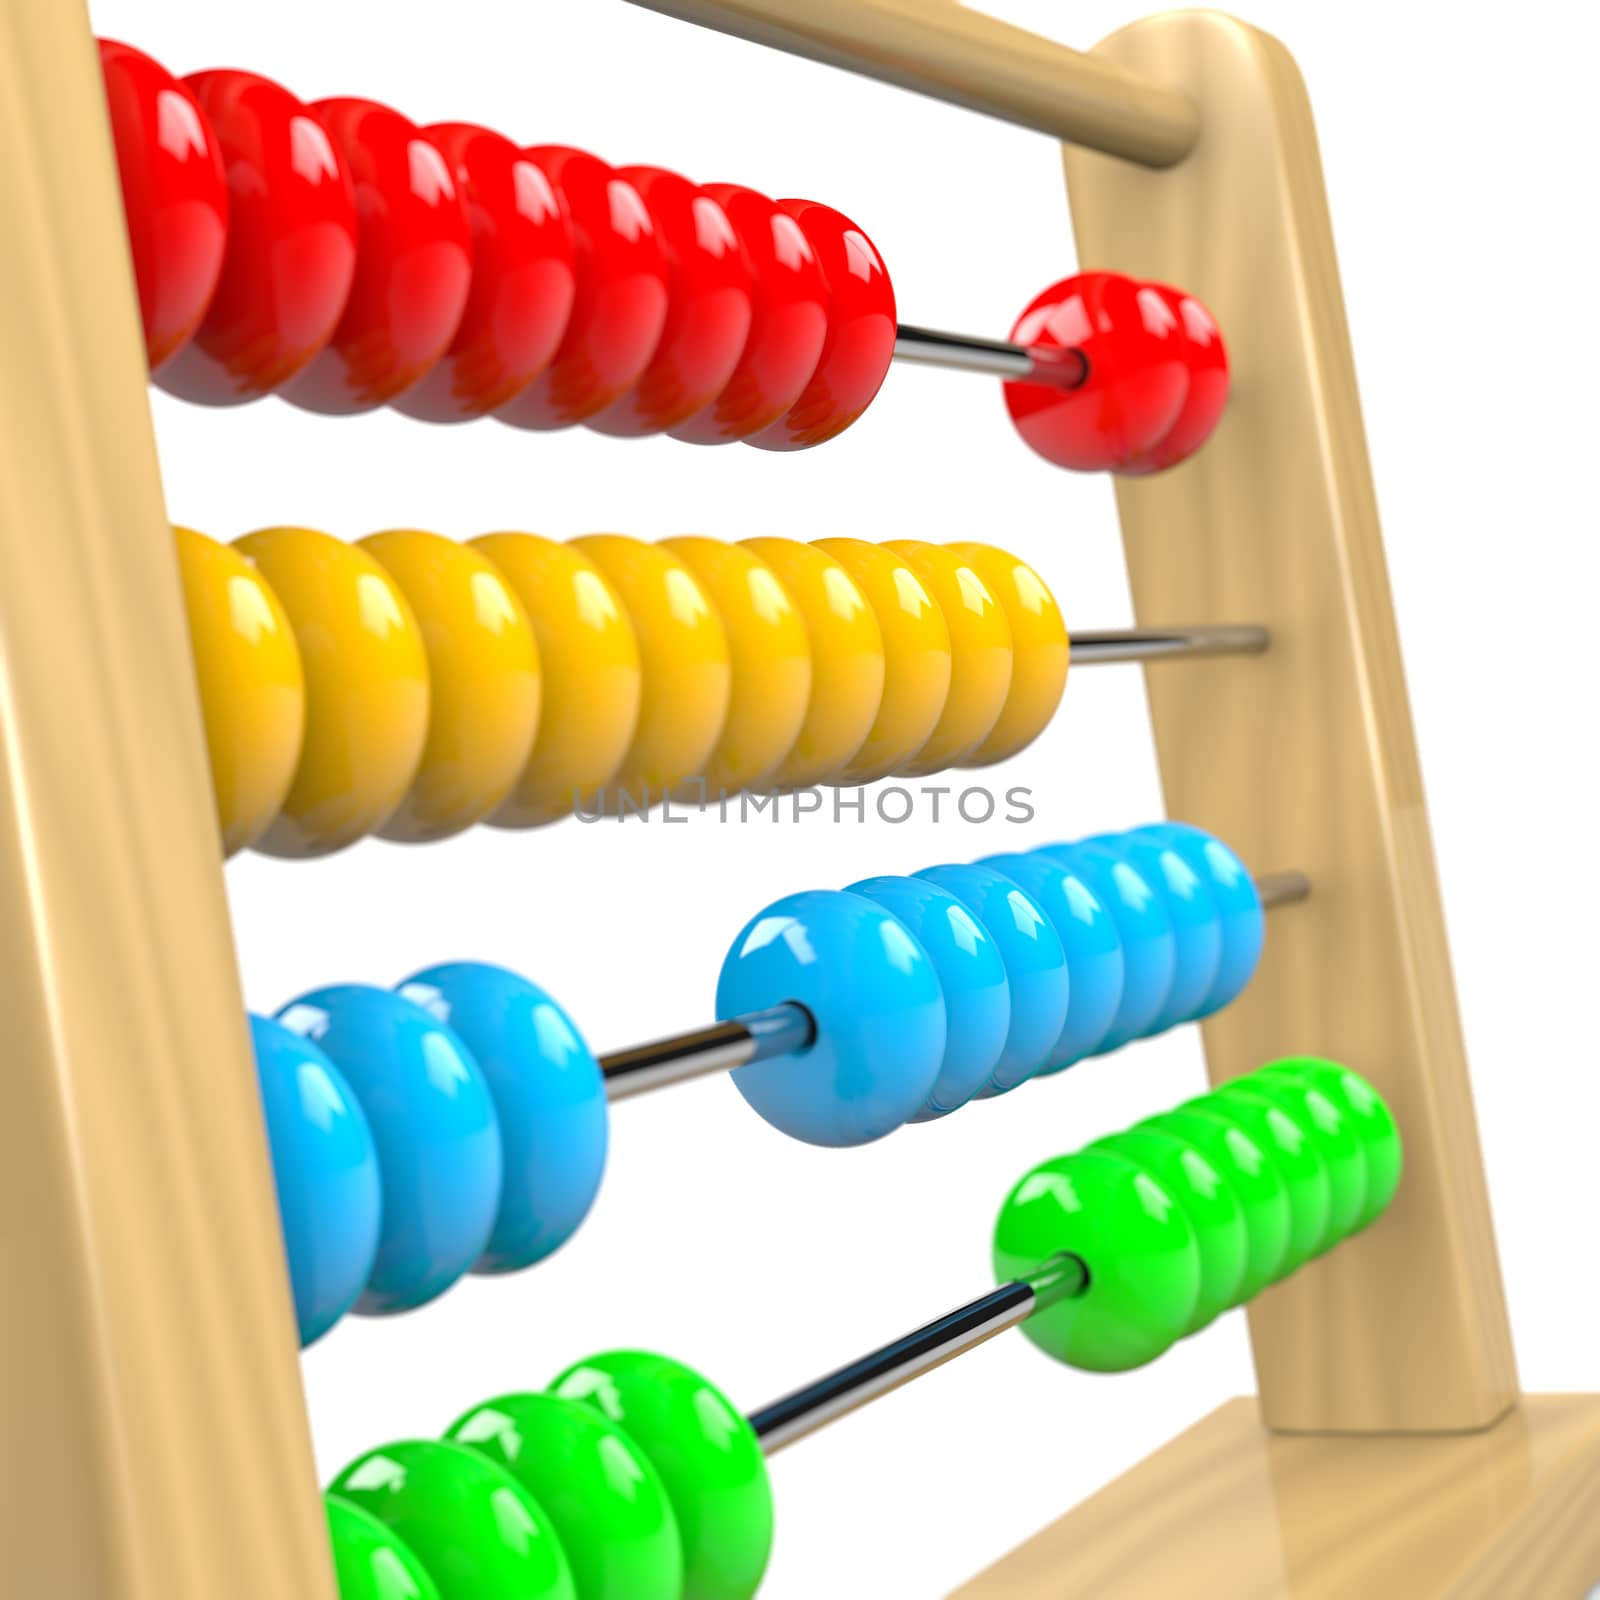 Colorful Wooden Abacus Illustration on White Background